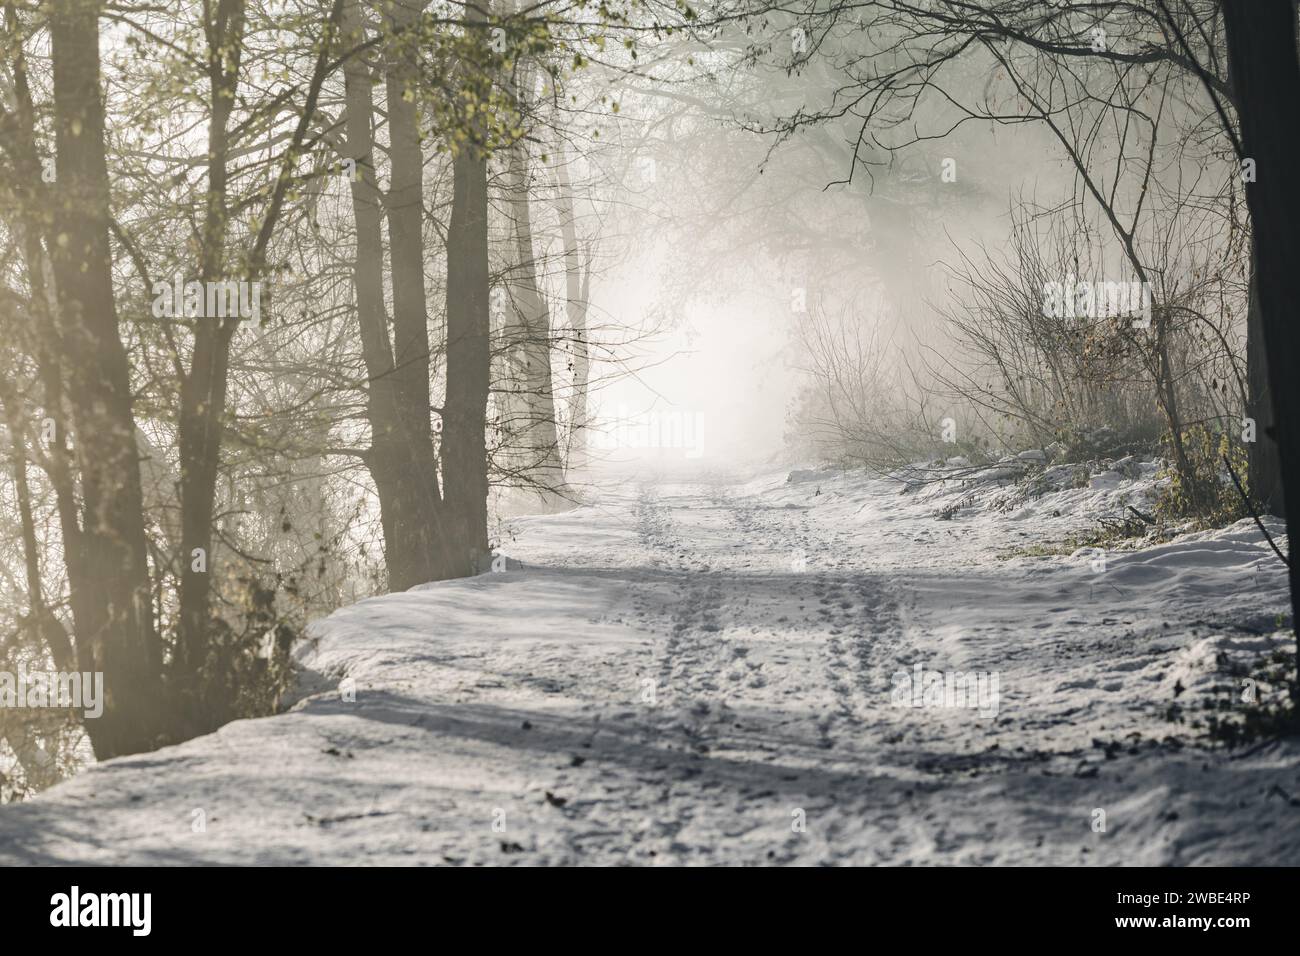 A beautiful wlka way or running path made for people near a river in my home town Gornja Radgona in Slovenia. The photo was taken a a feezing cold dec Stock Photo